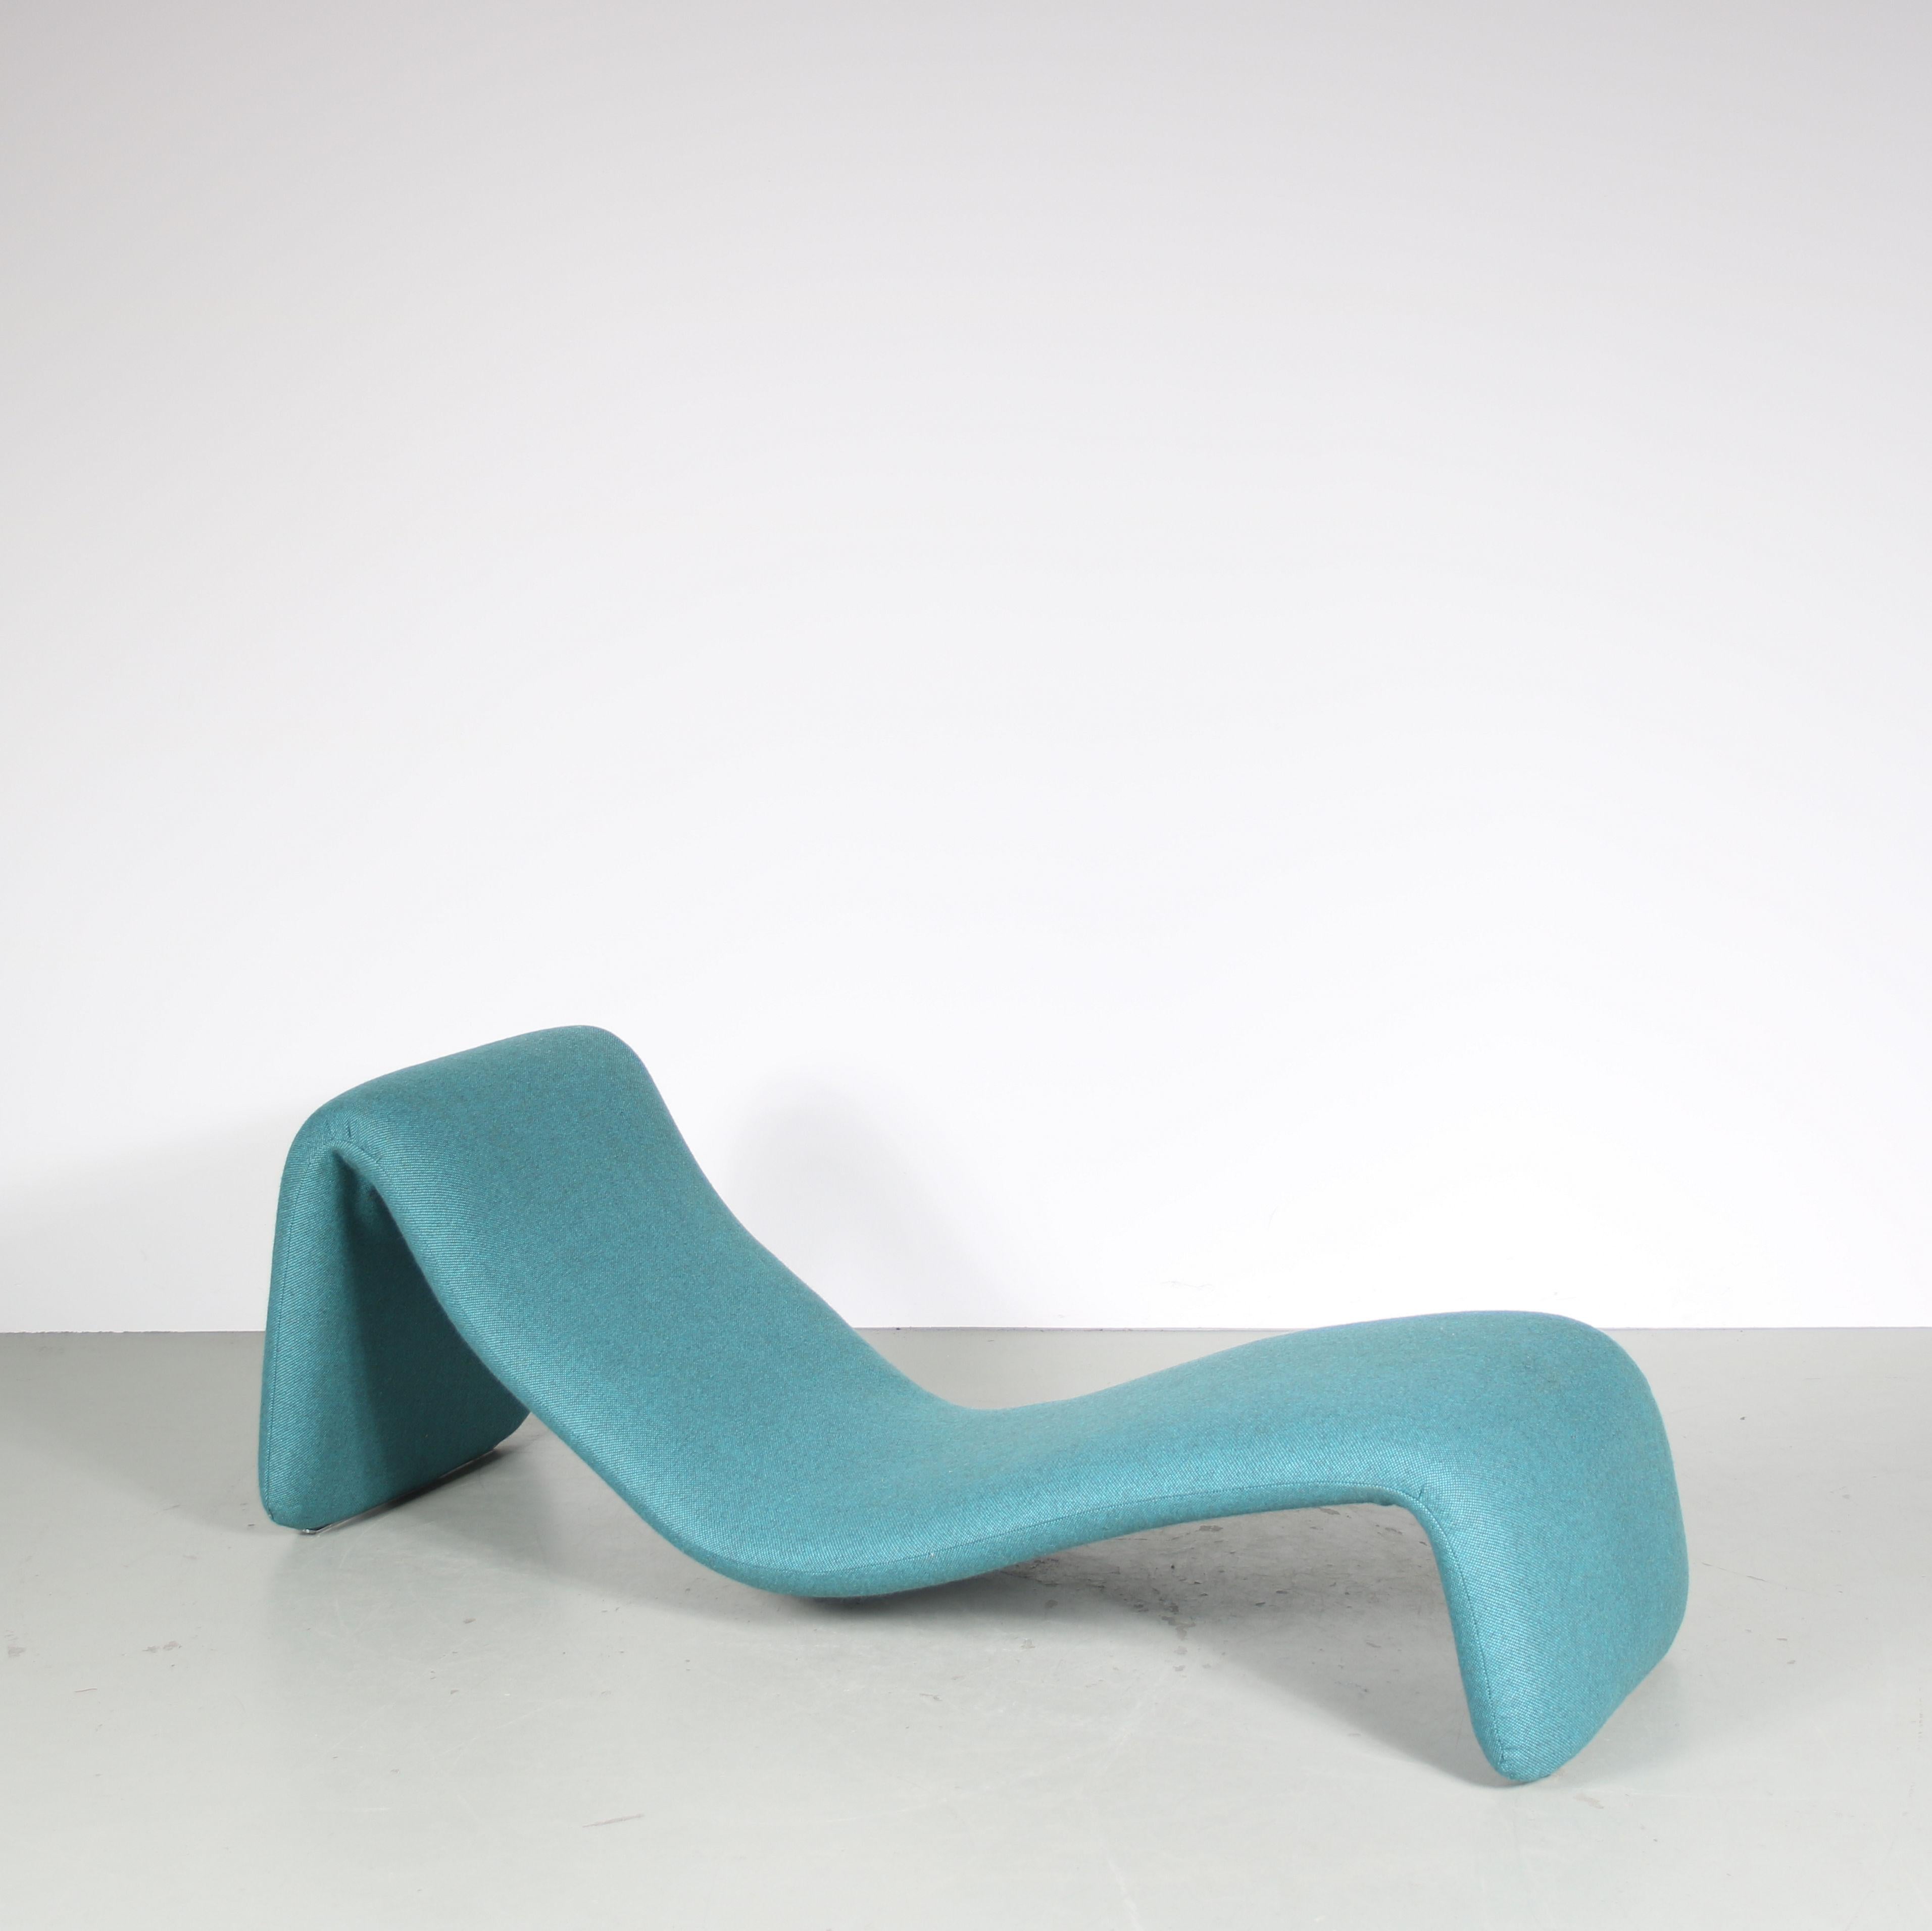 French “Djin” Daybed by Olivier Mourgue for Airborne, France